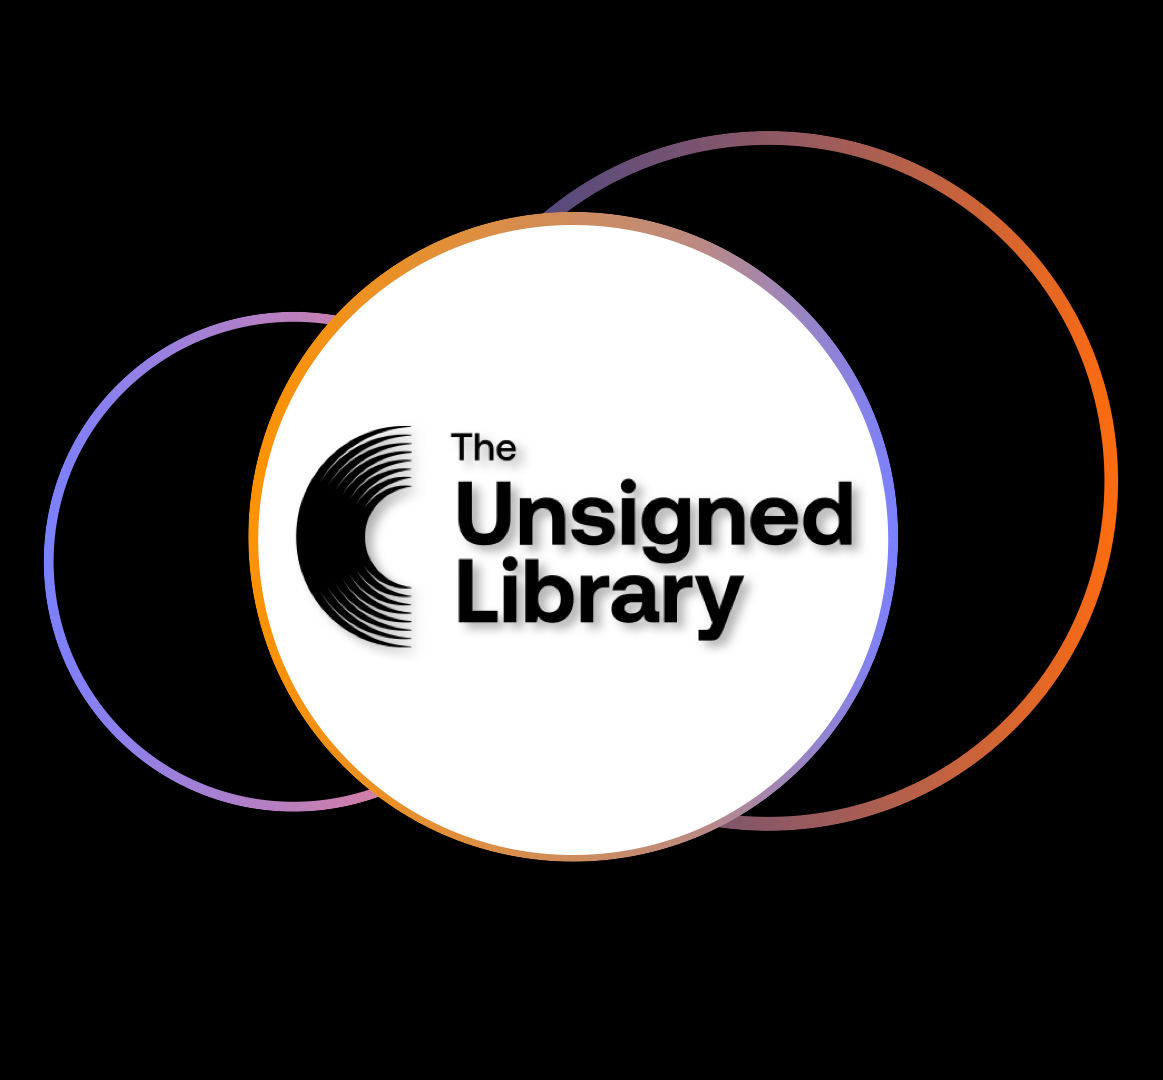 The Unsigned Library logo